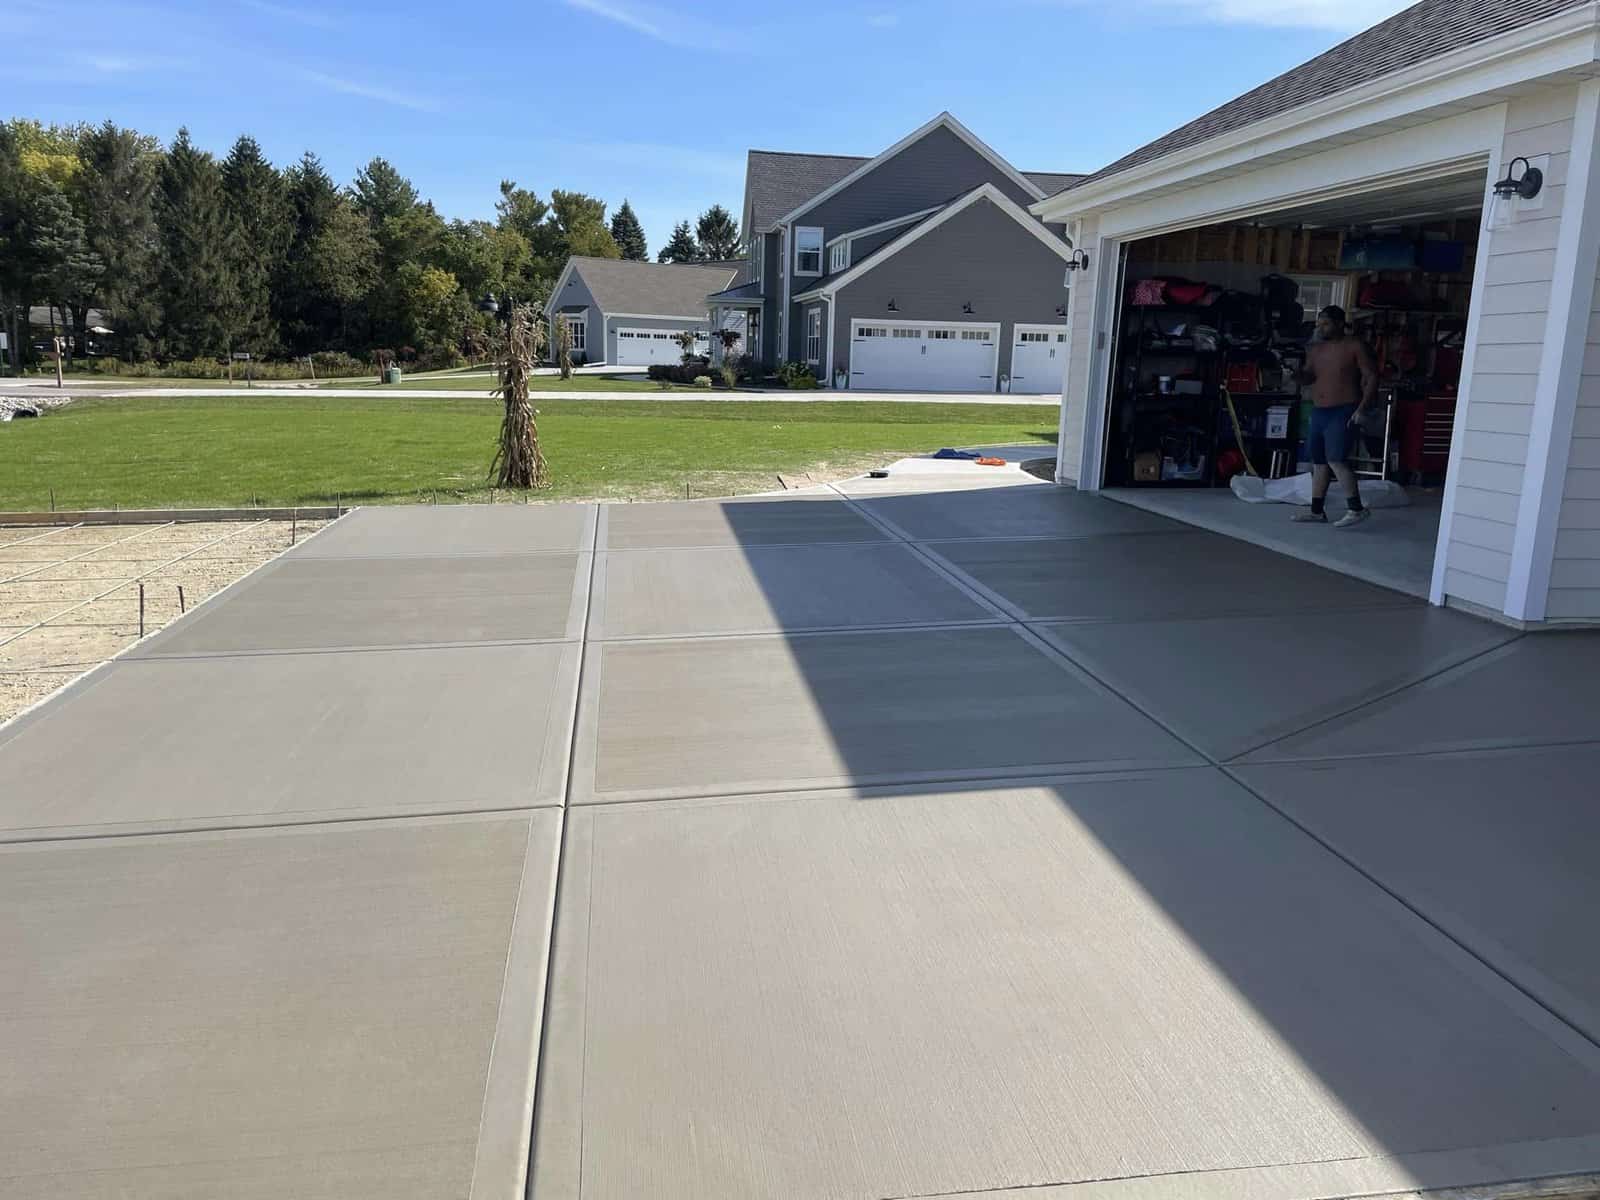 A fresh concrete driveway leading to an open garage with a person standing inside, set against the backdrop of a residential neighborhood with green lawns and houses under a clear blue sky.